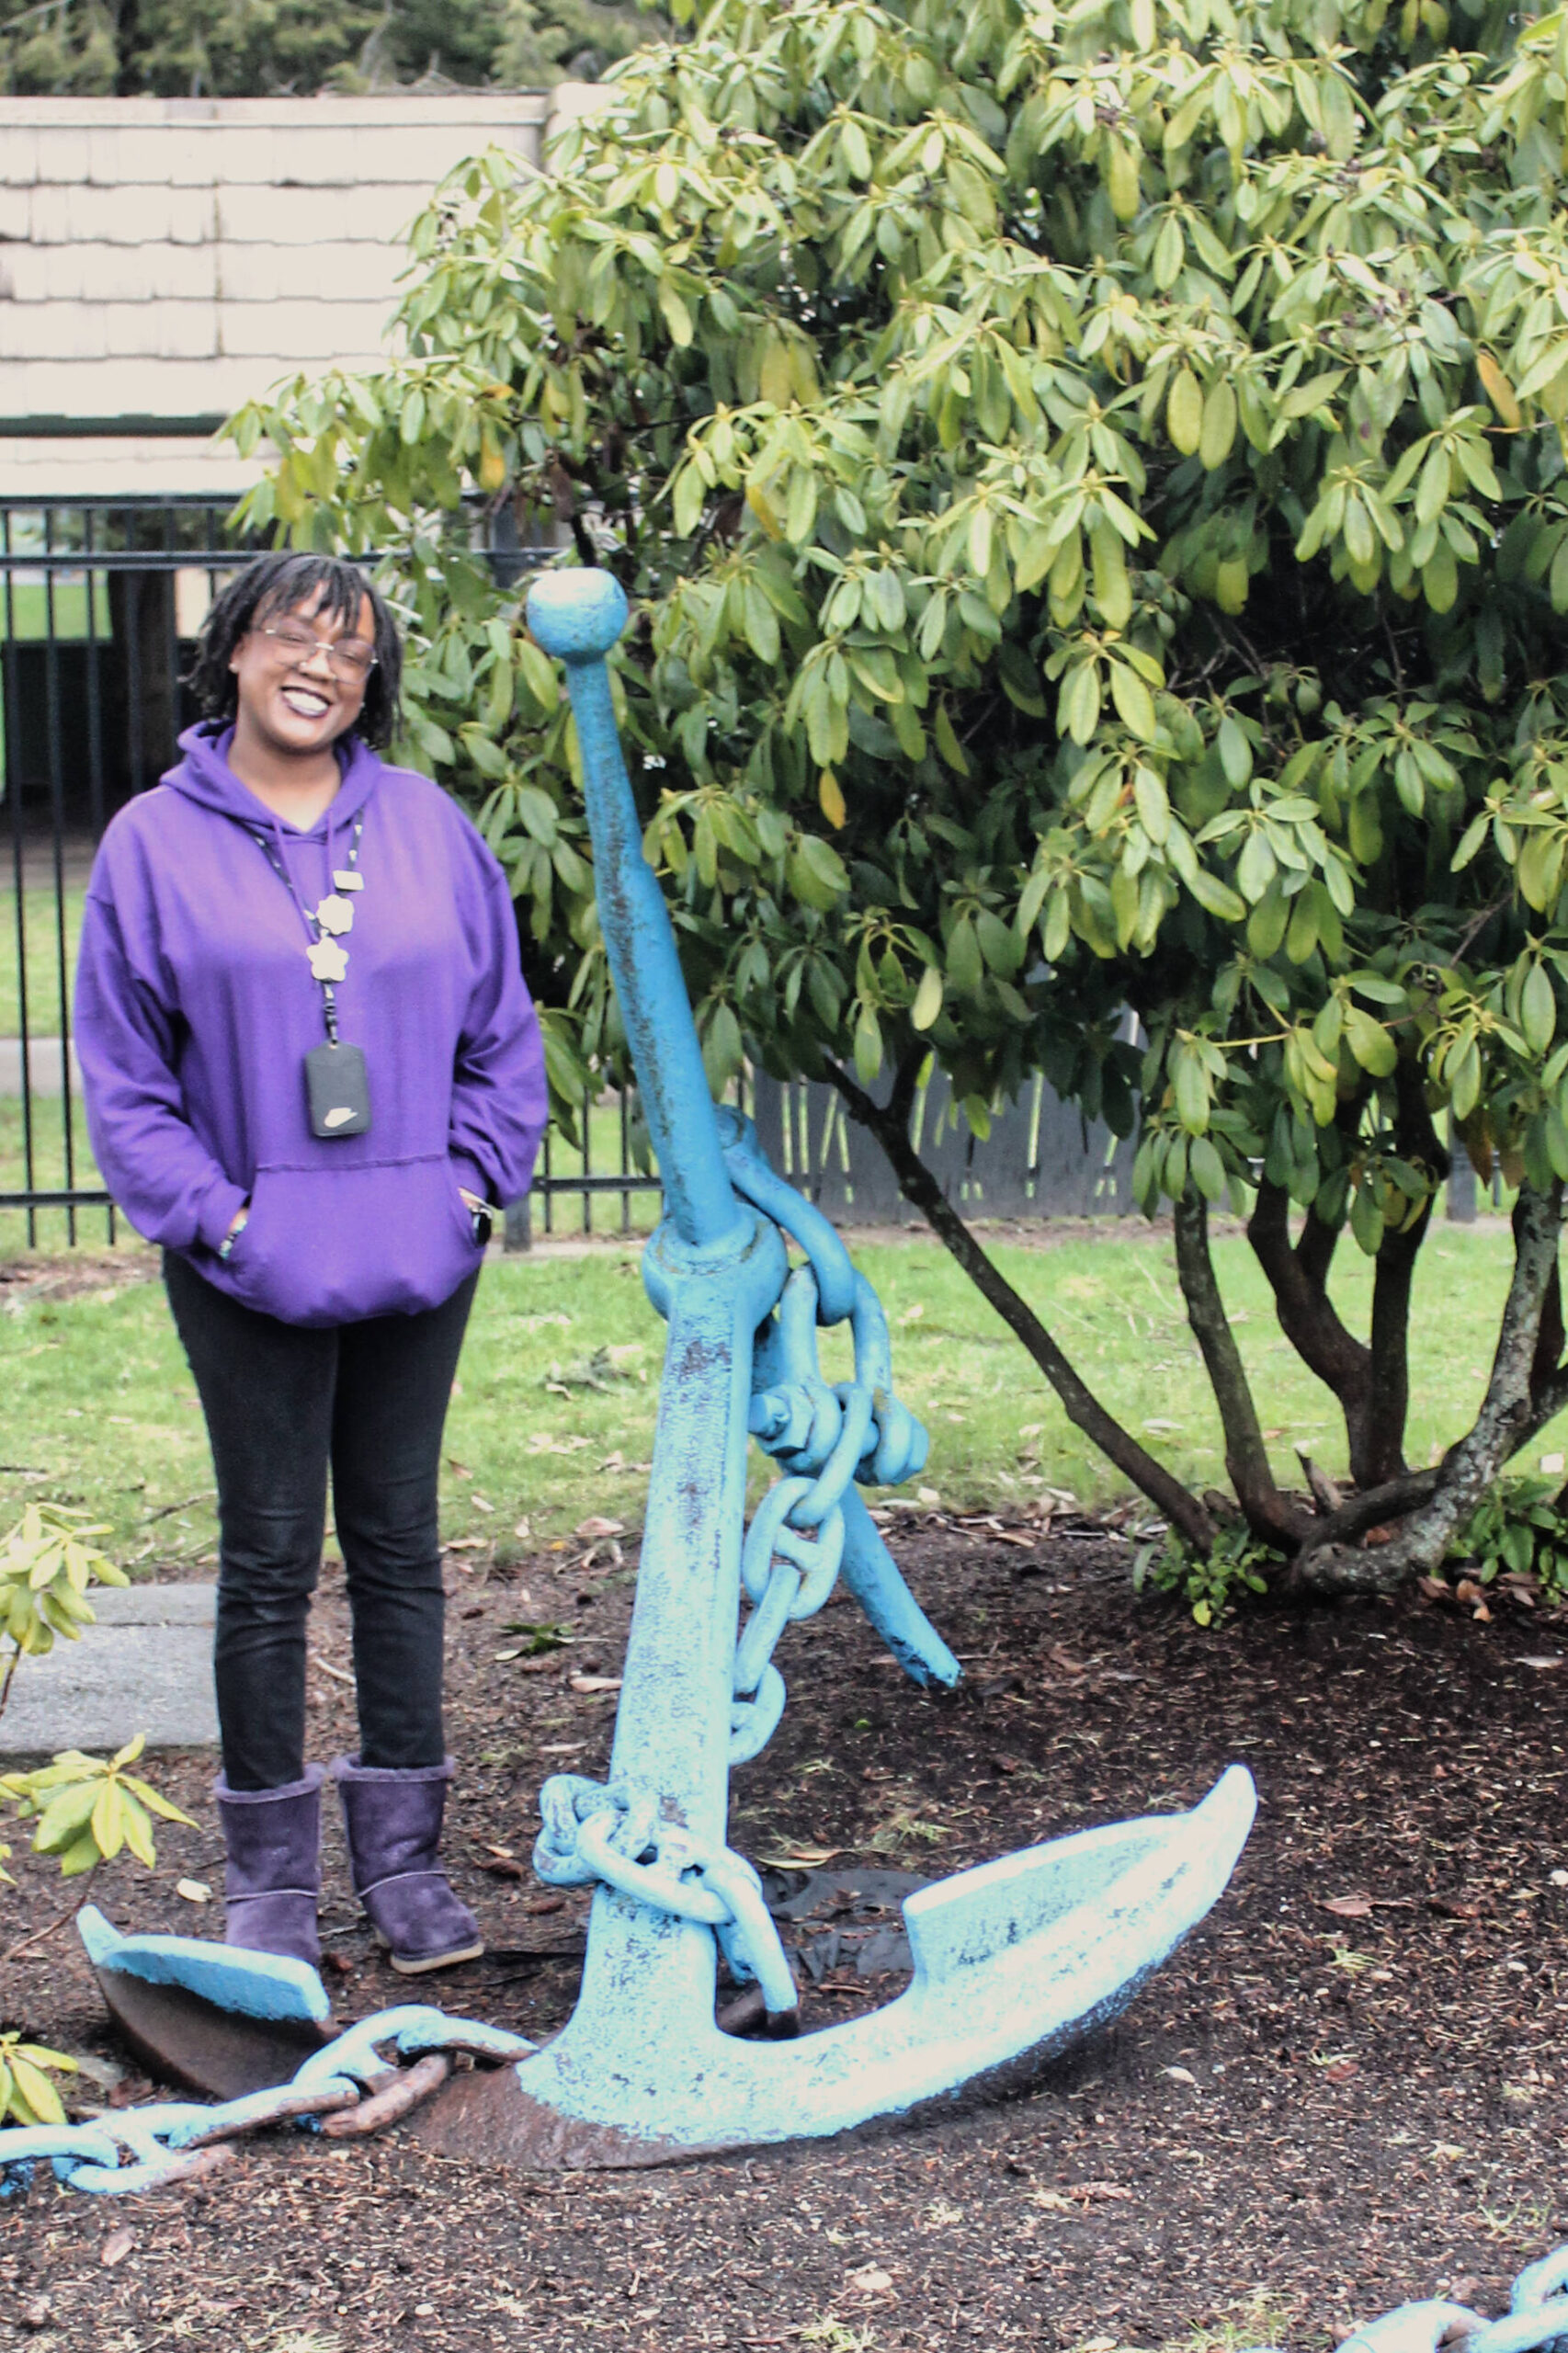 Danielle McFarlane poses with the Twin Lakes anchor in front of the elementary school. The anchor represents their school mascot. (Photo by Keelin Everly-Lang / The Mirror)